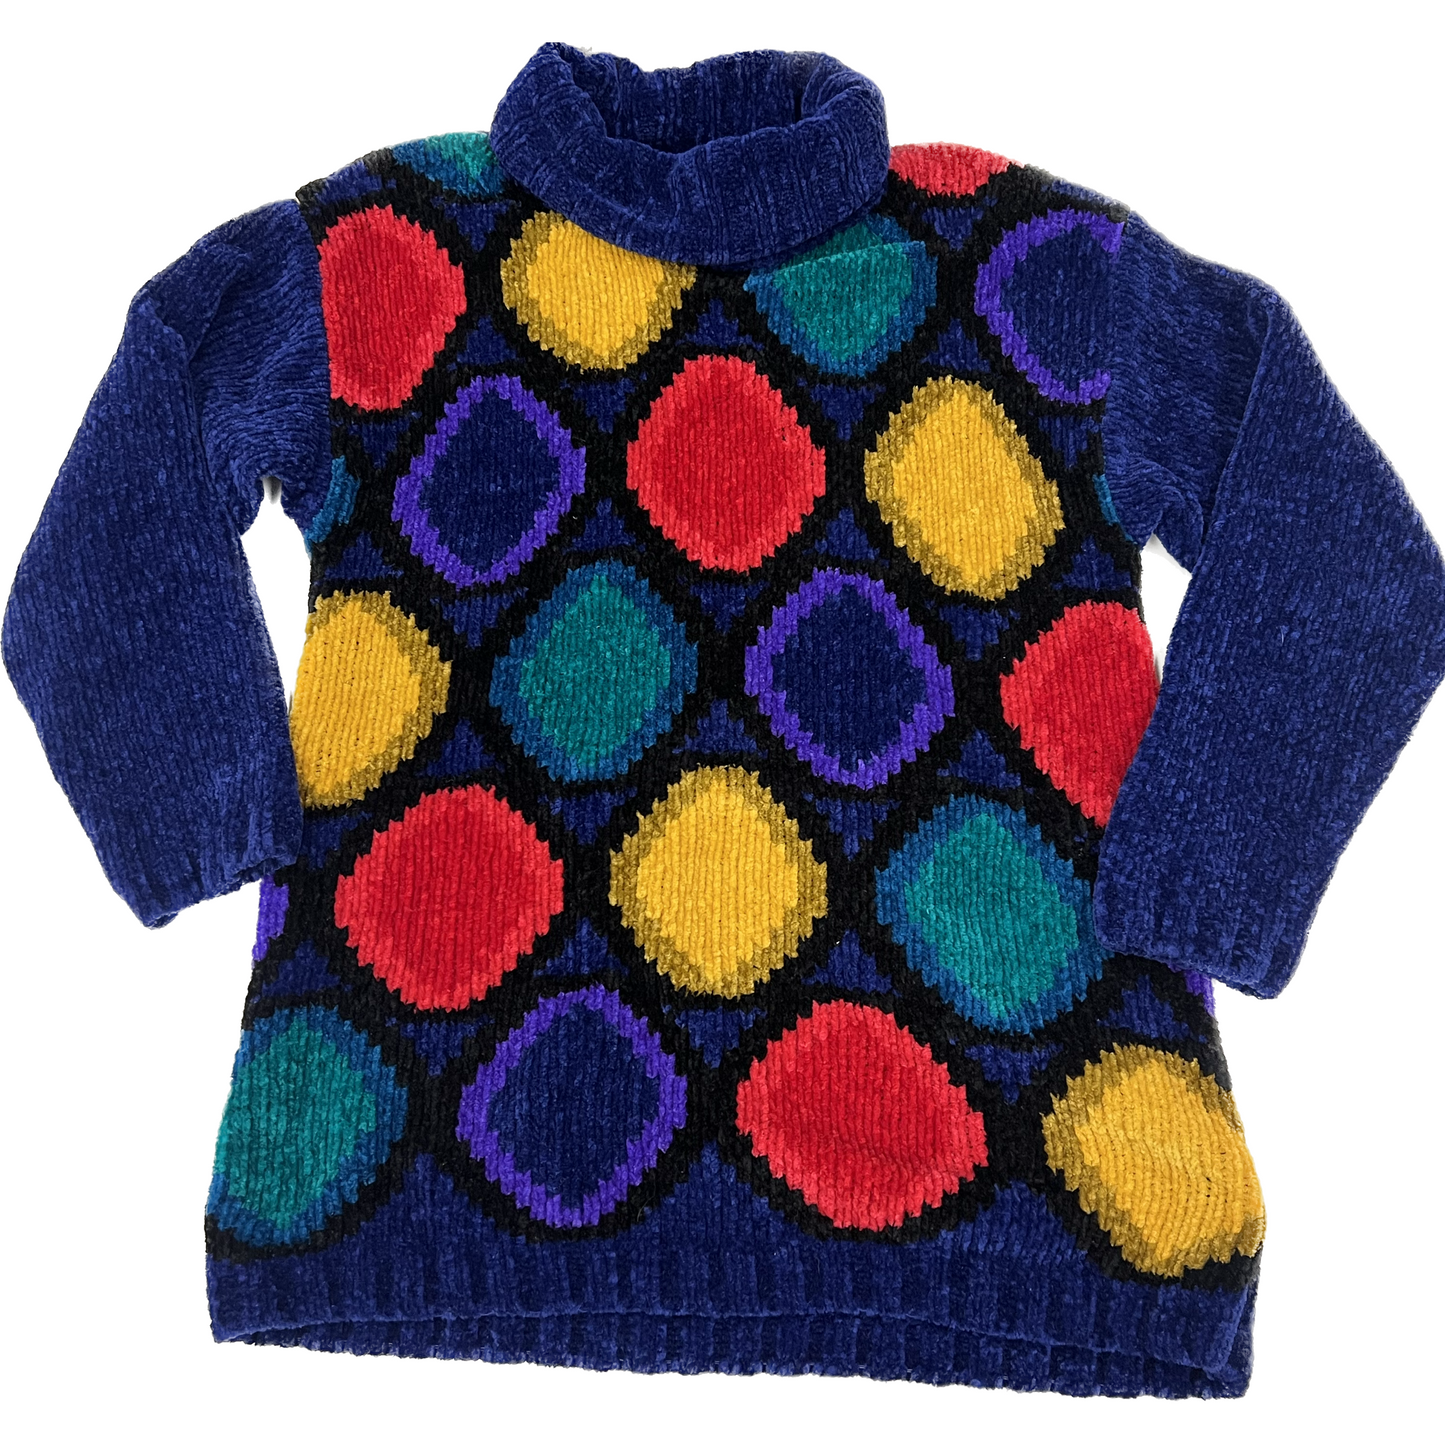 Colorful Turtle Neck Sweater (S)